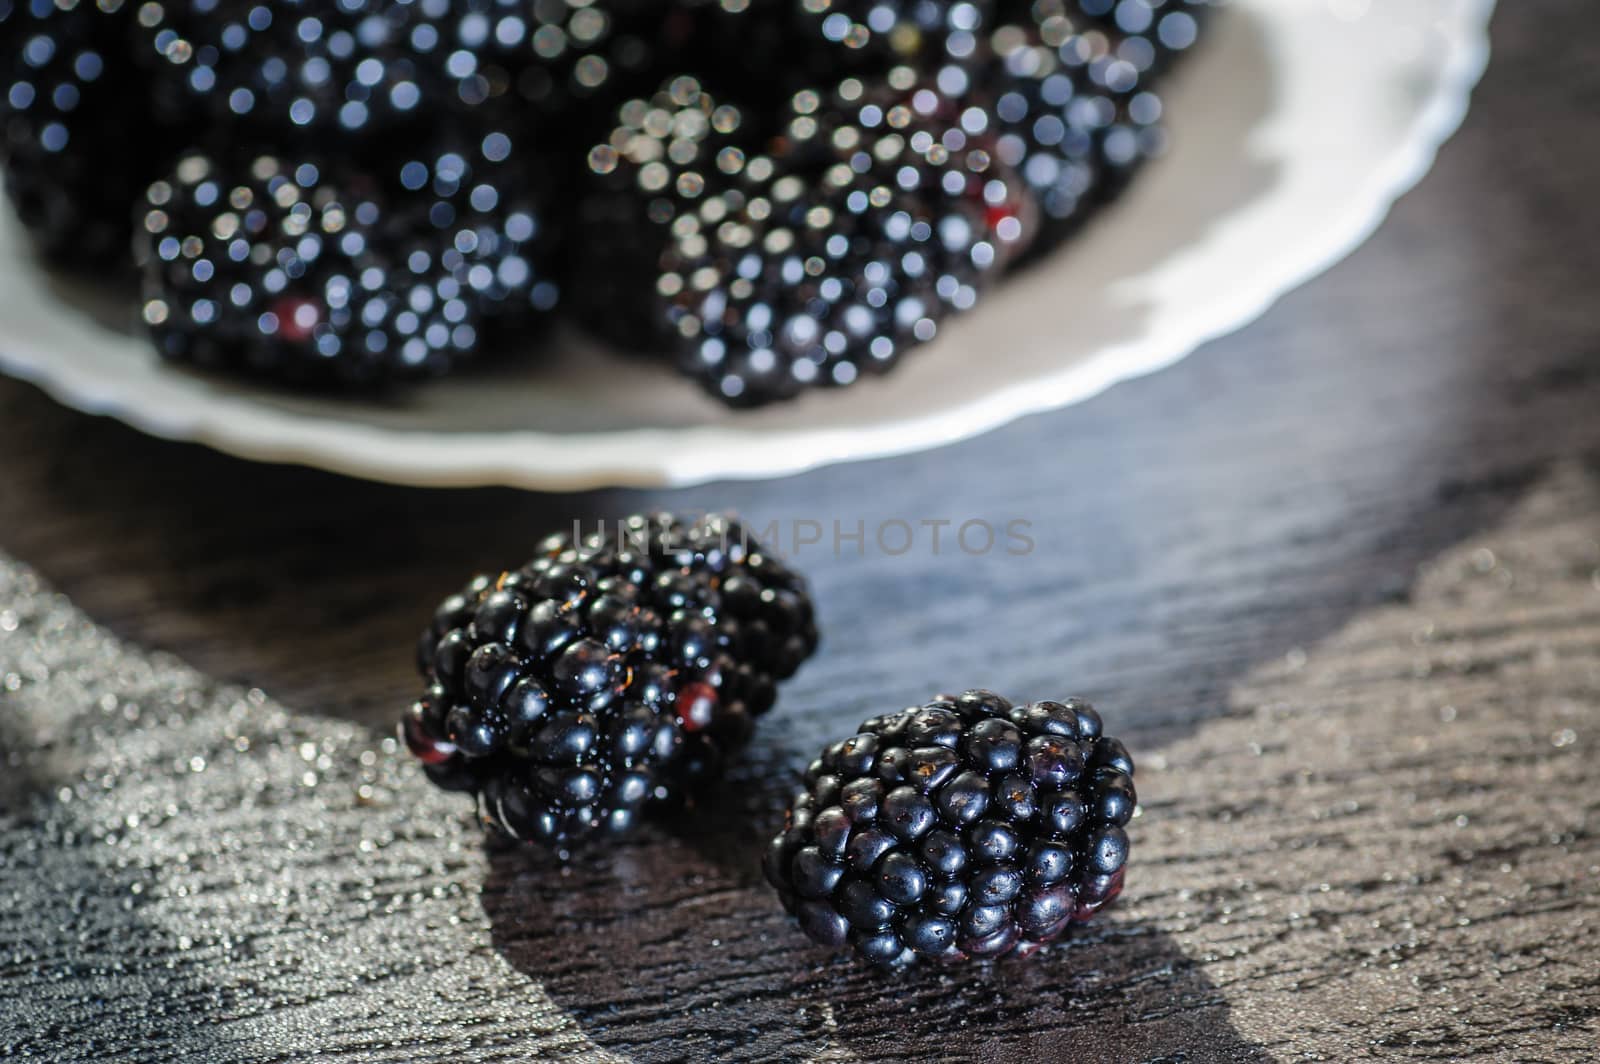 BlackBerry on a plate for organic design